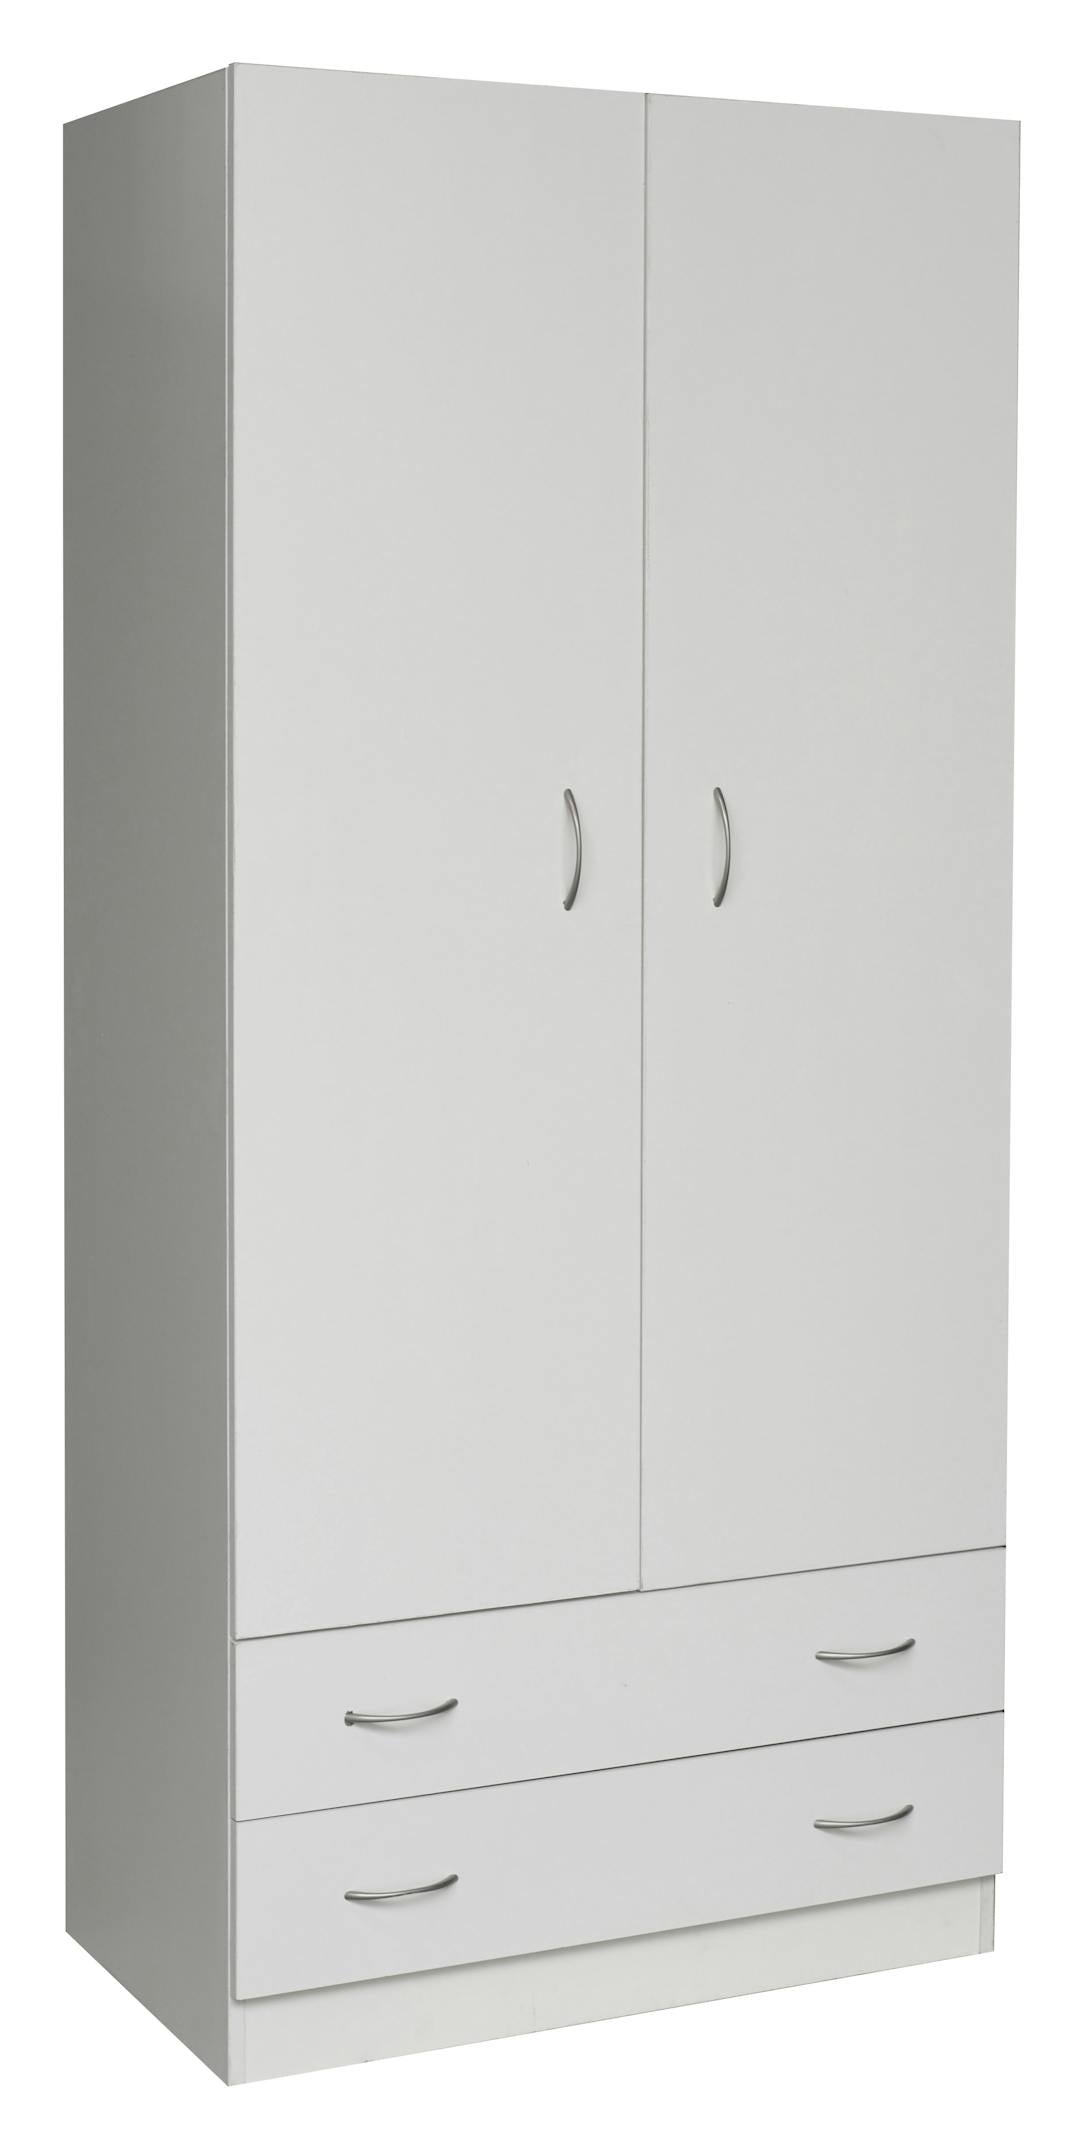 Mission Wardrobe with Drawers, White